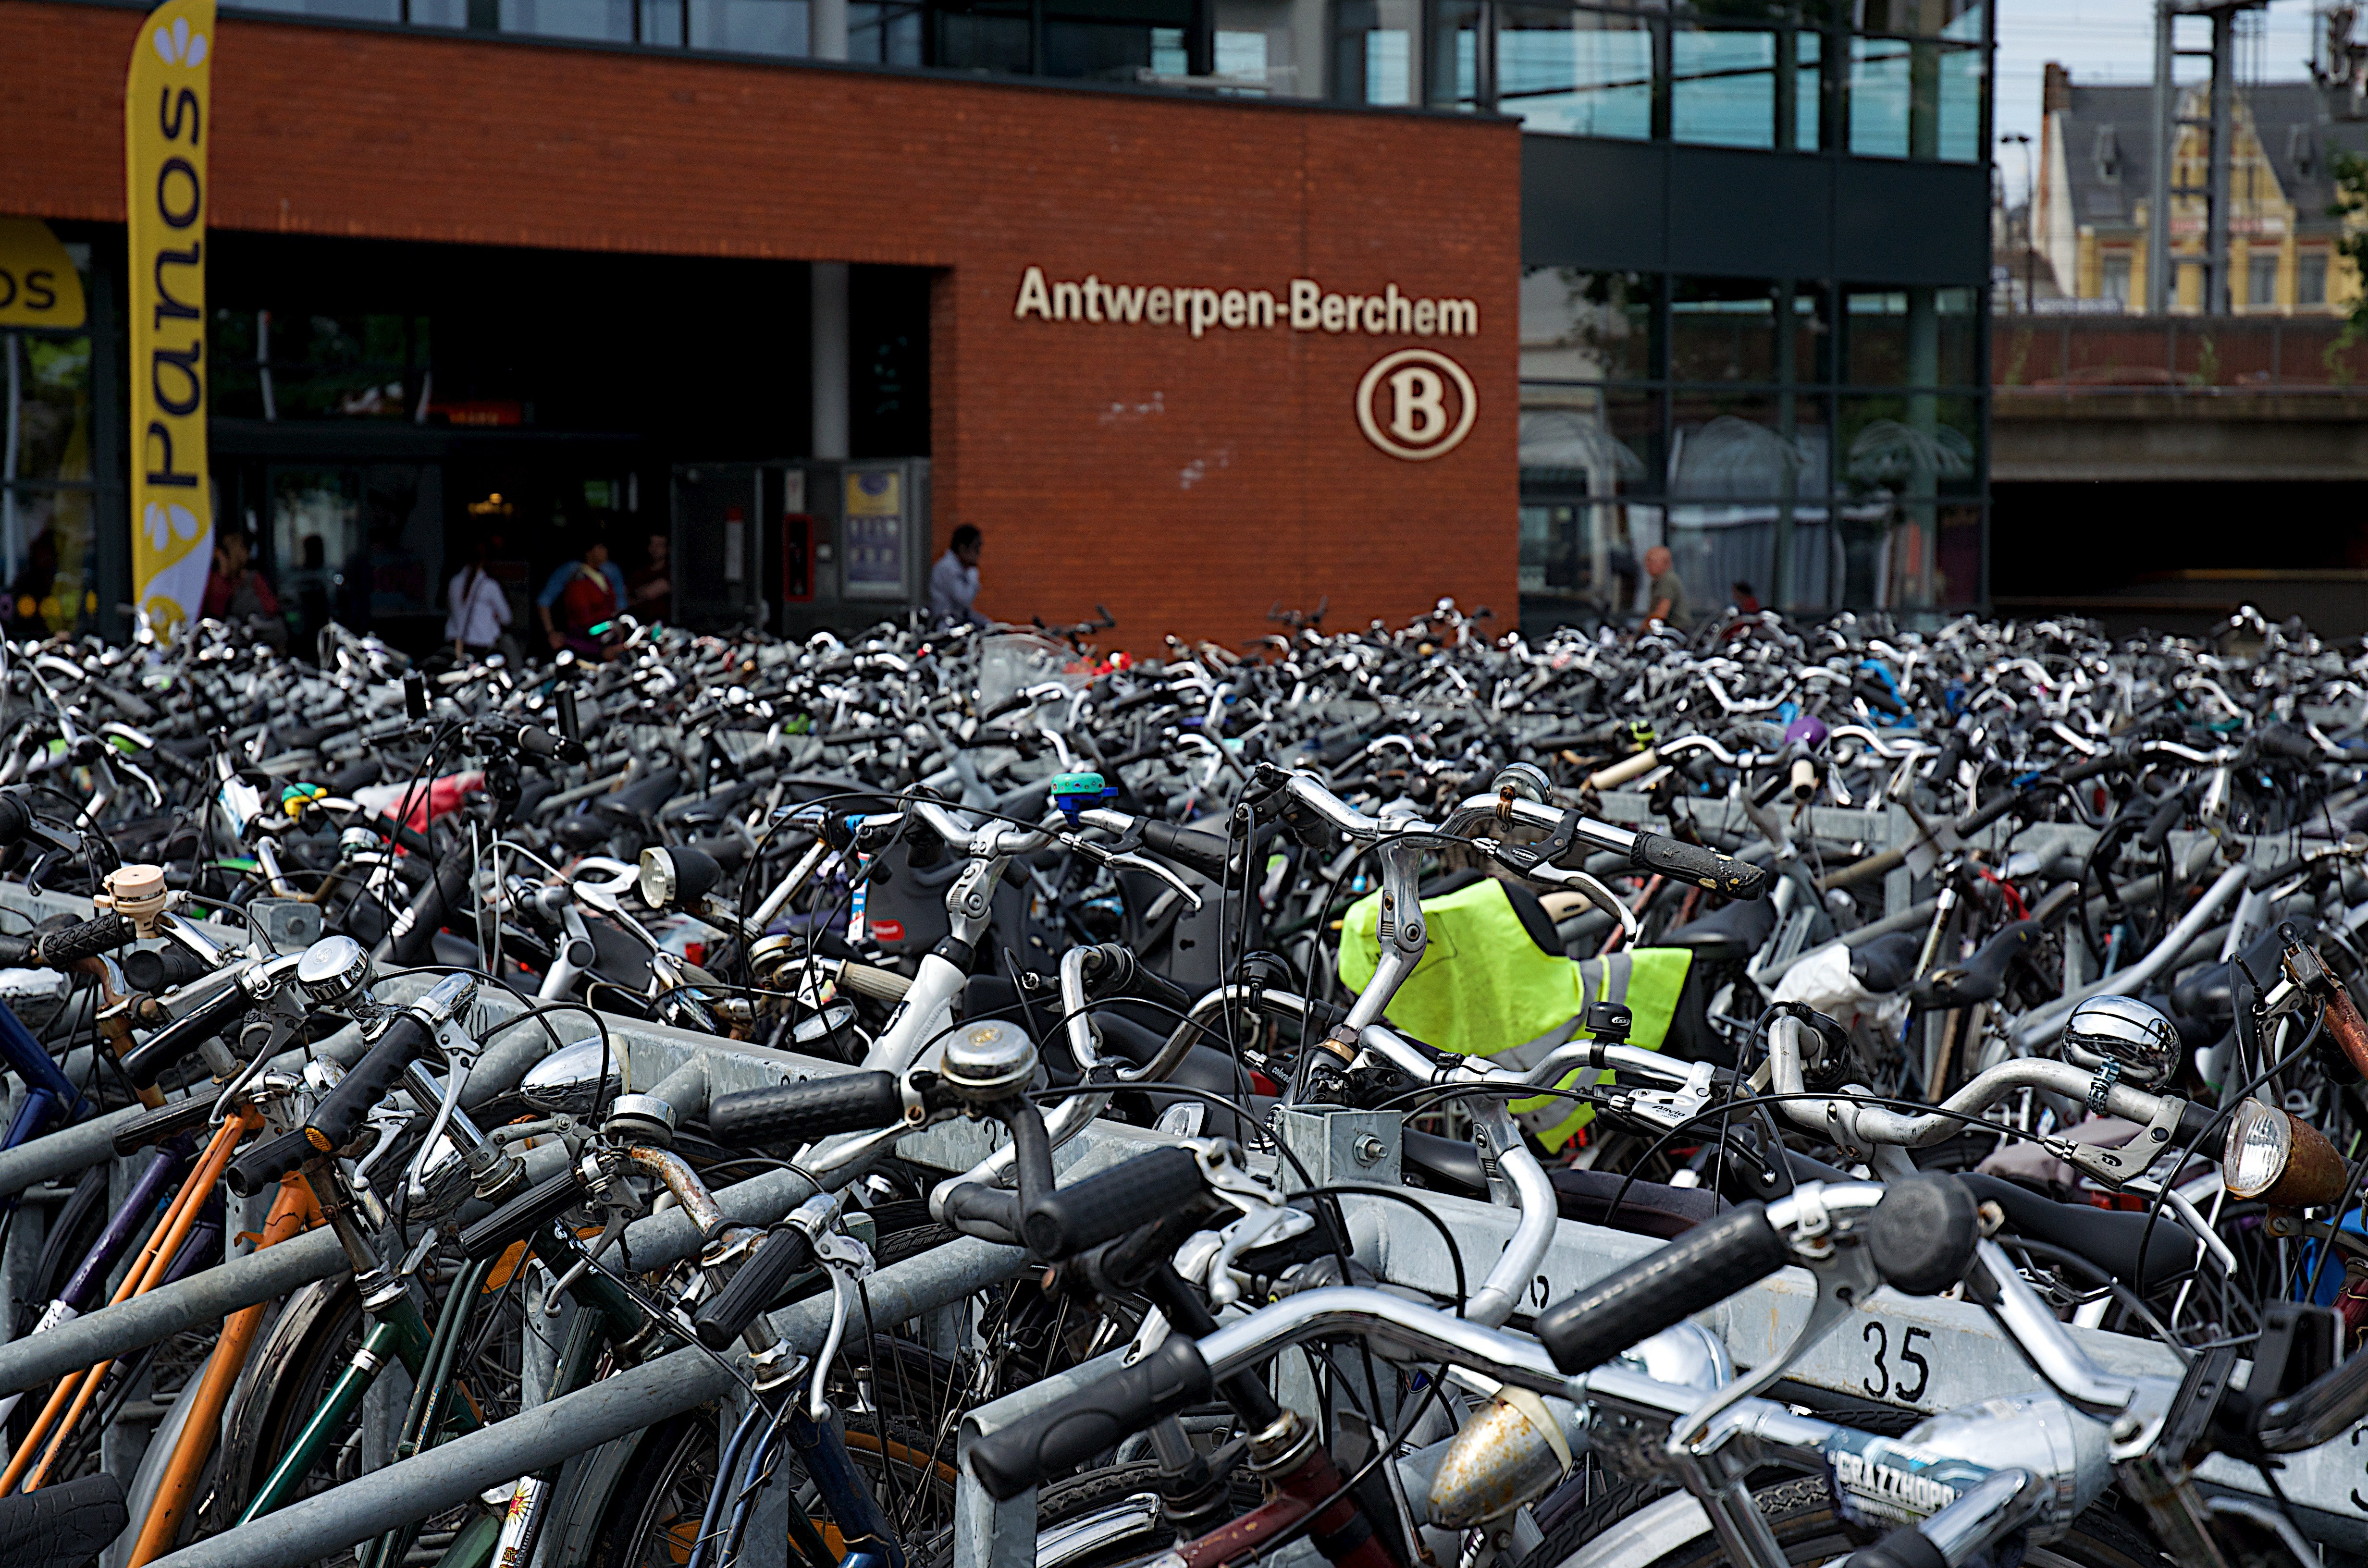 Parking stress, now also for bikers